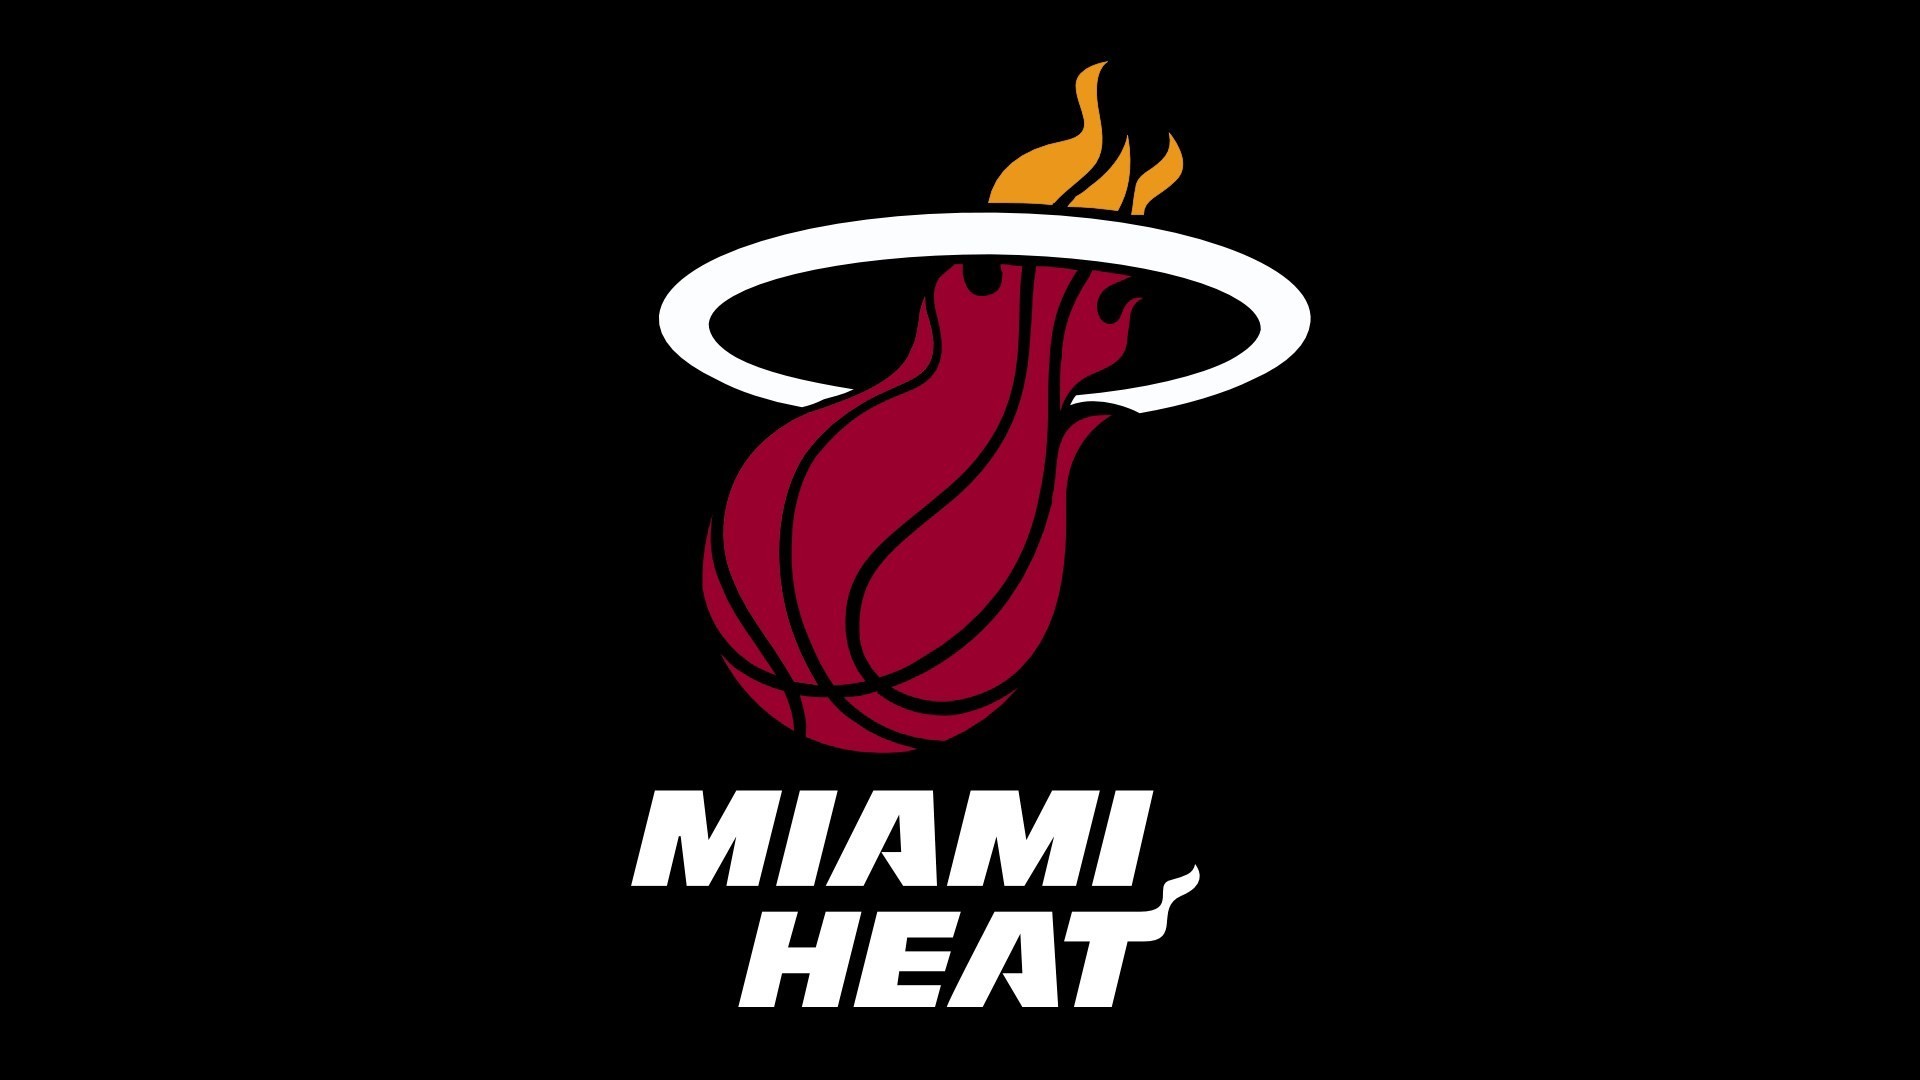 1920x1080  Is This 2018 NBA Team Any Good?: Miami Heat. Download. Miami Heat  Wallpapers HD ...